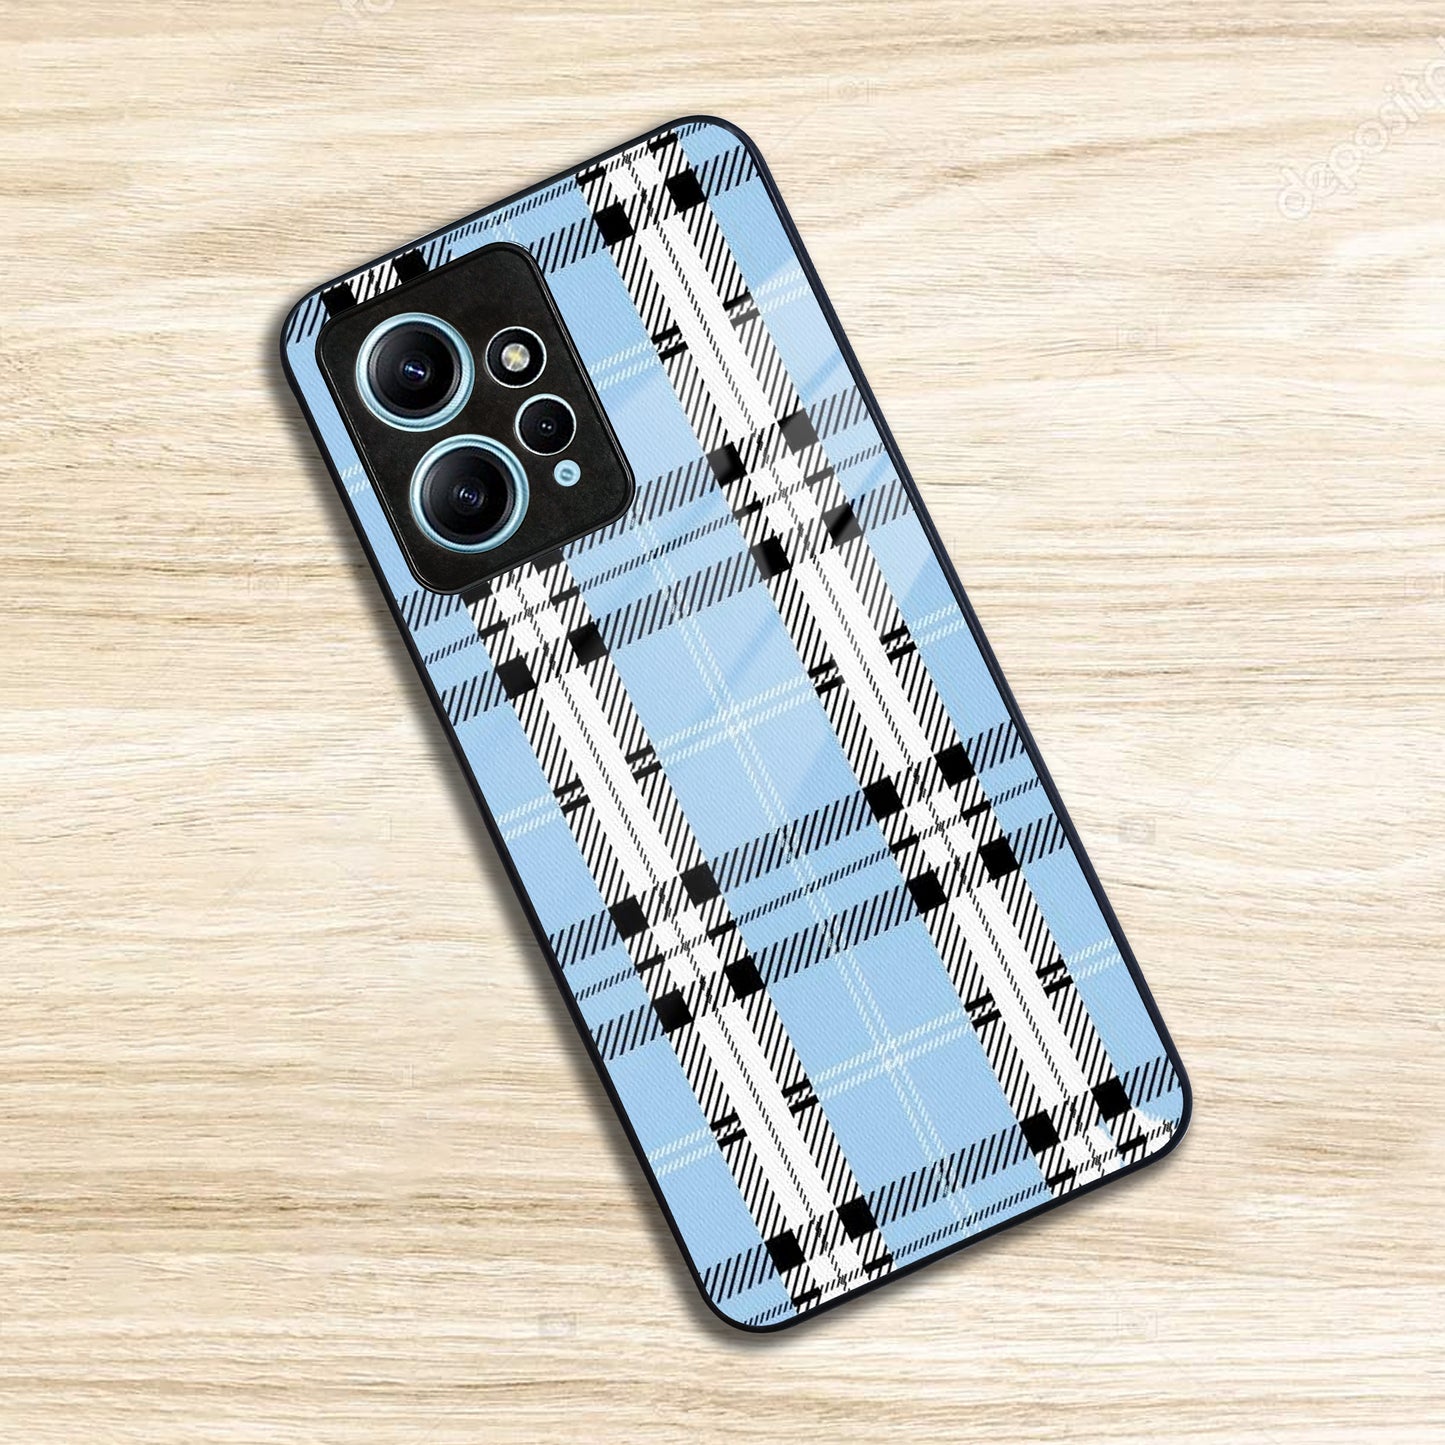 Check Glass Phone Case And Cover For Redmi/Xiaomi